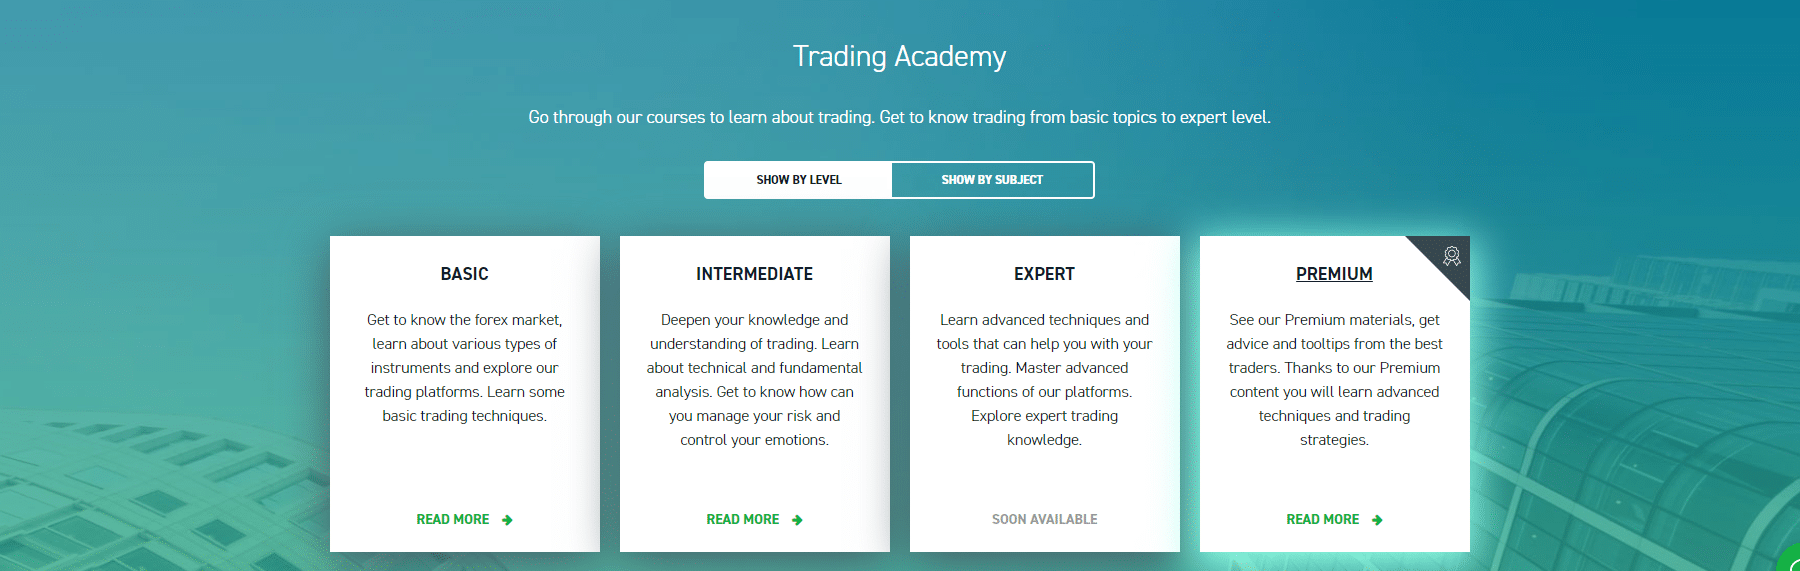 Professional education center for beginners and advanced traders